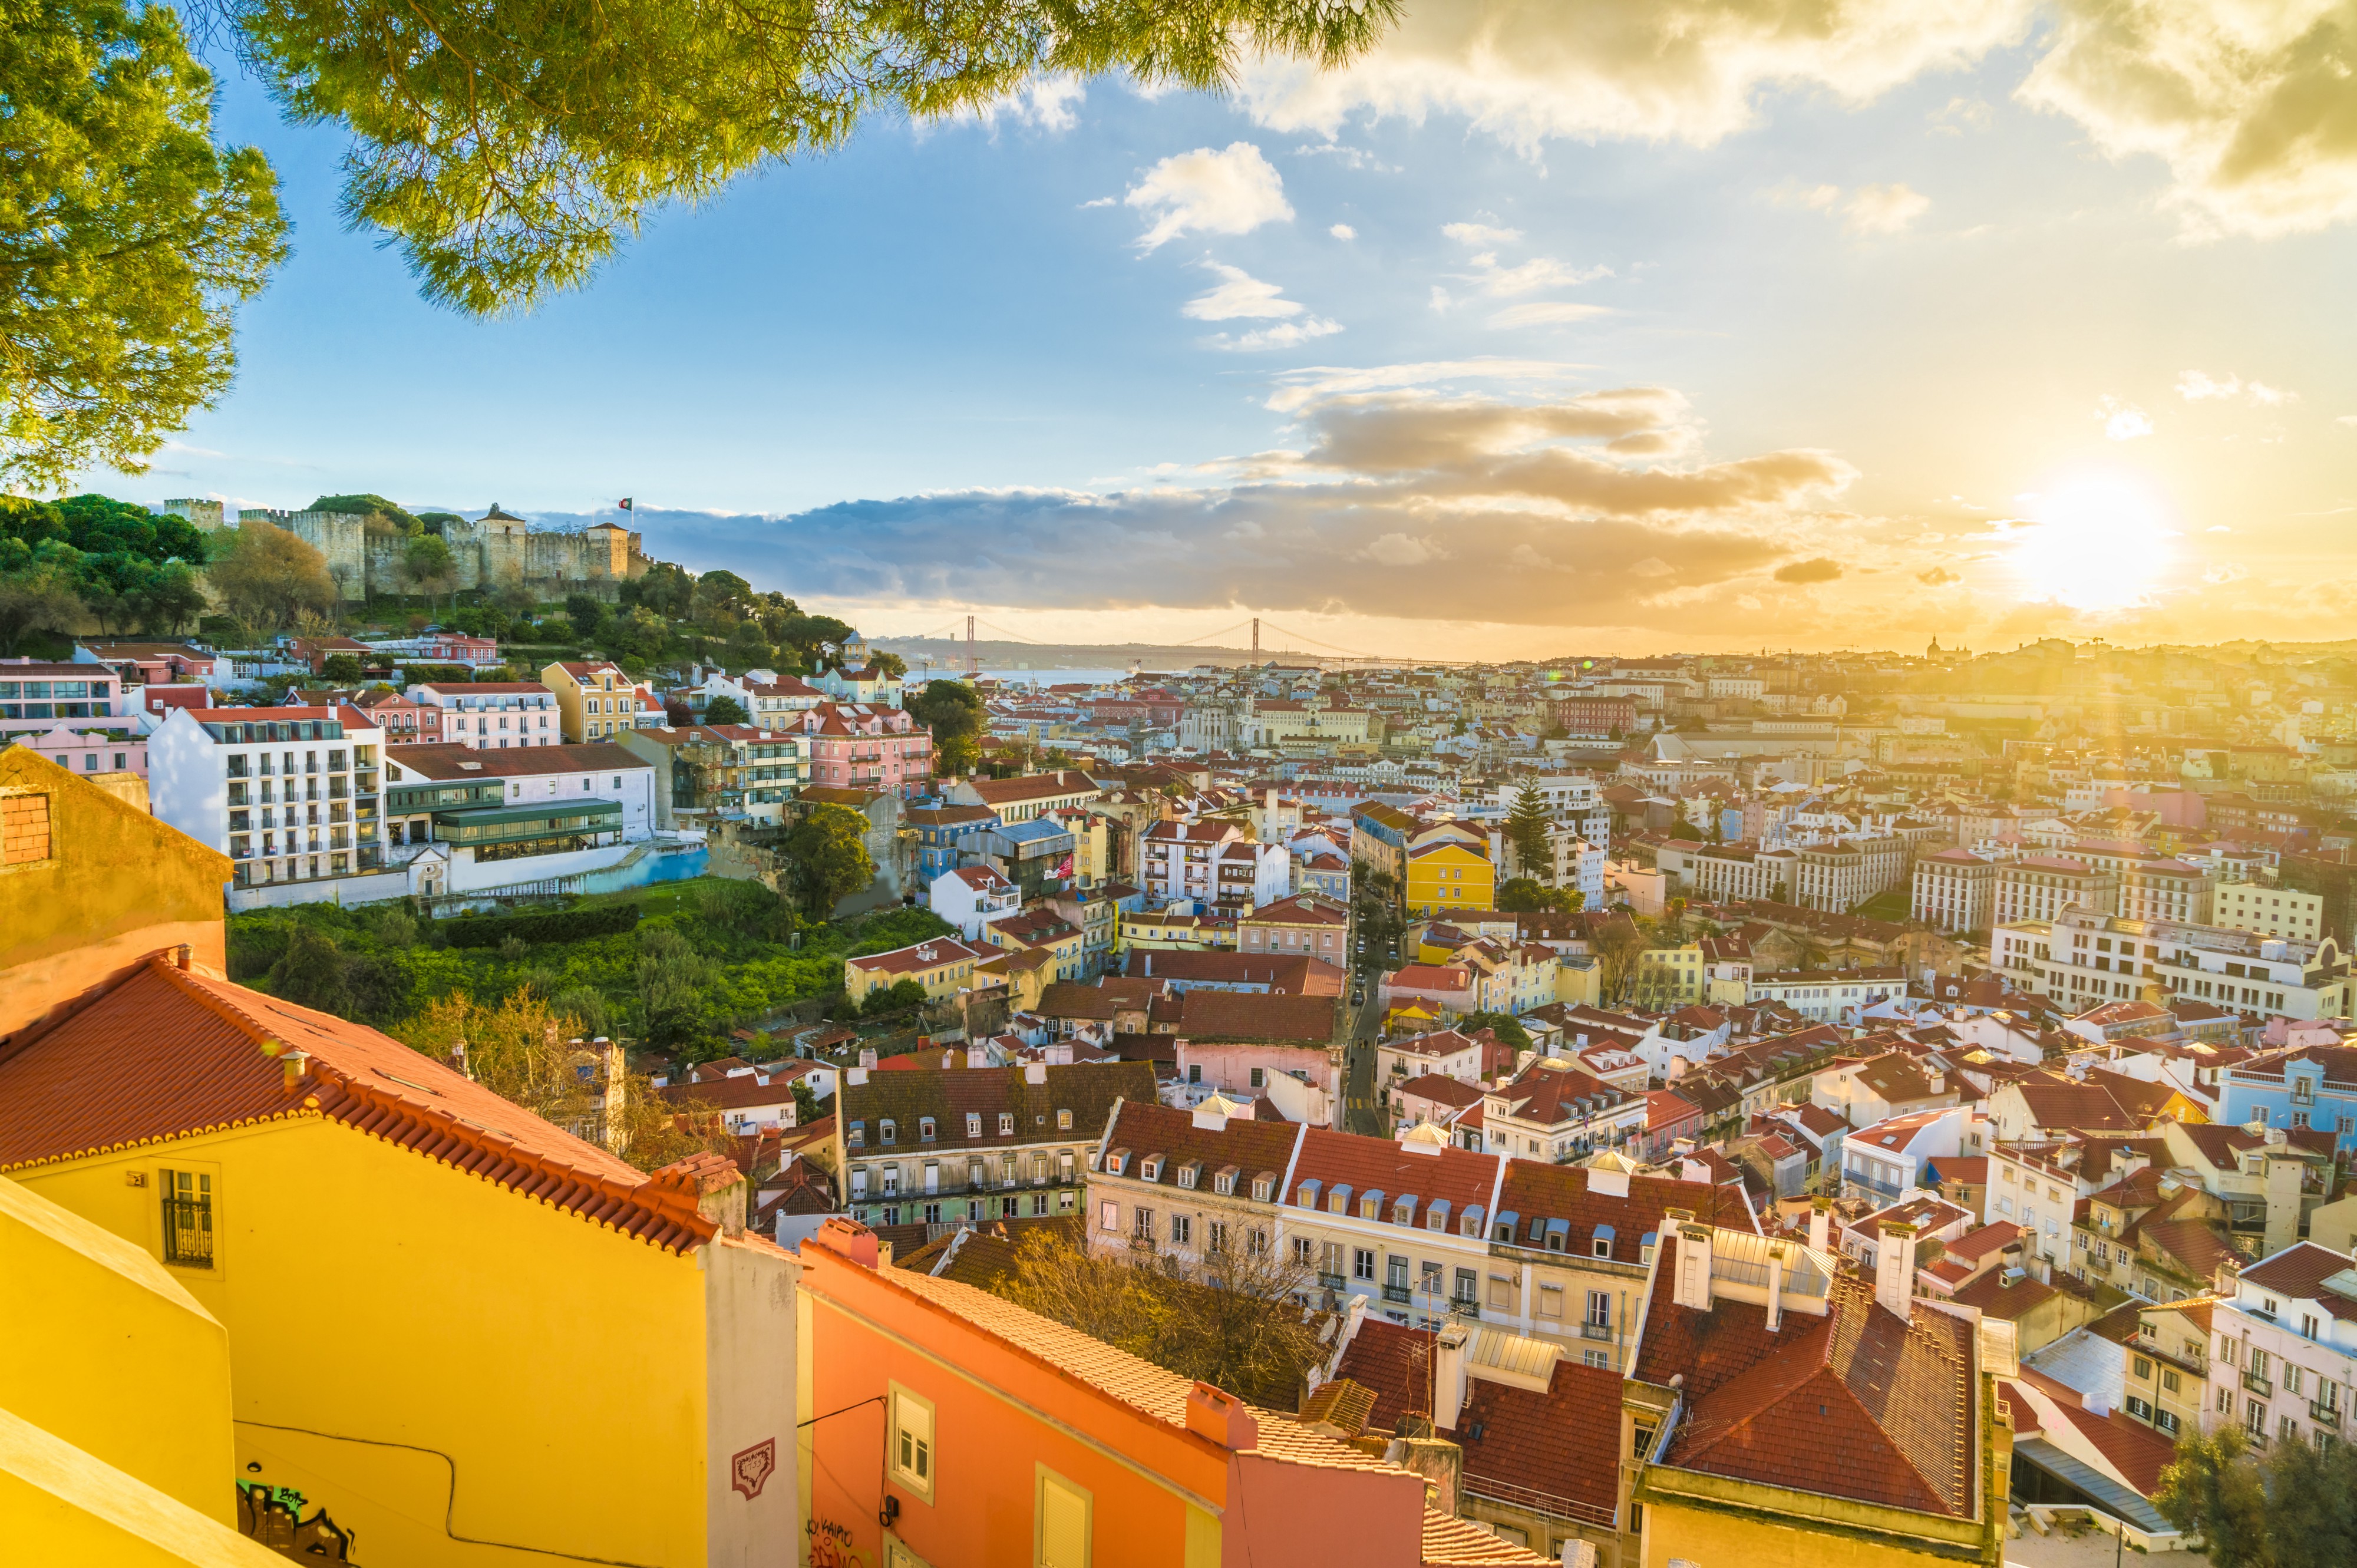 Top attractions in Lisbon you cannot miss